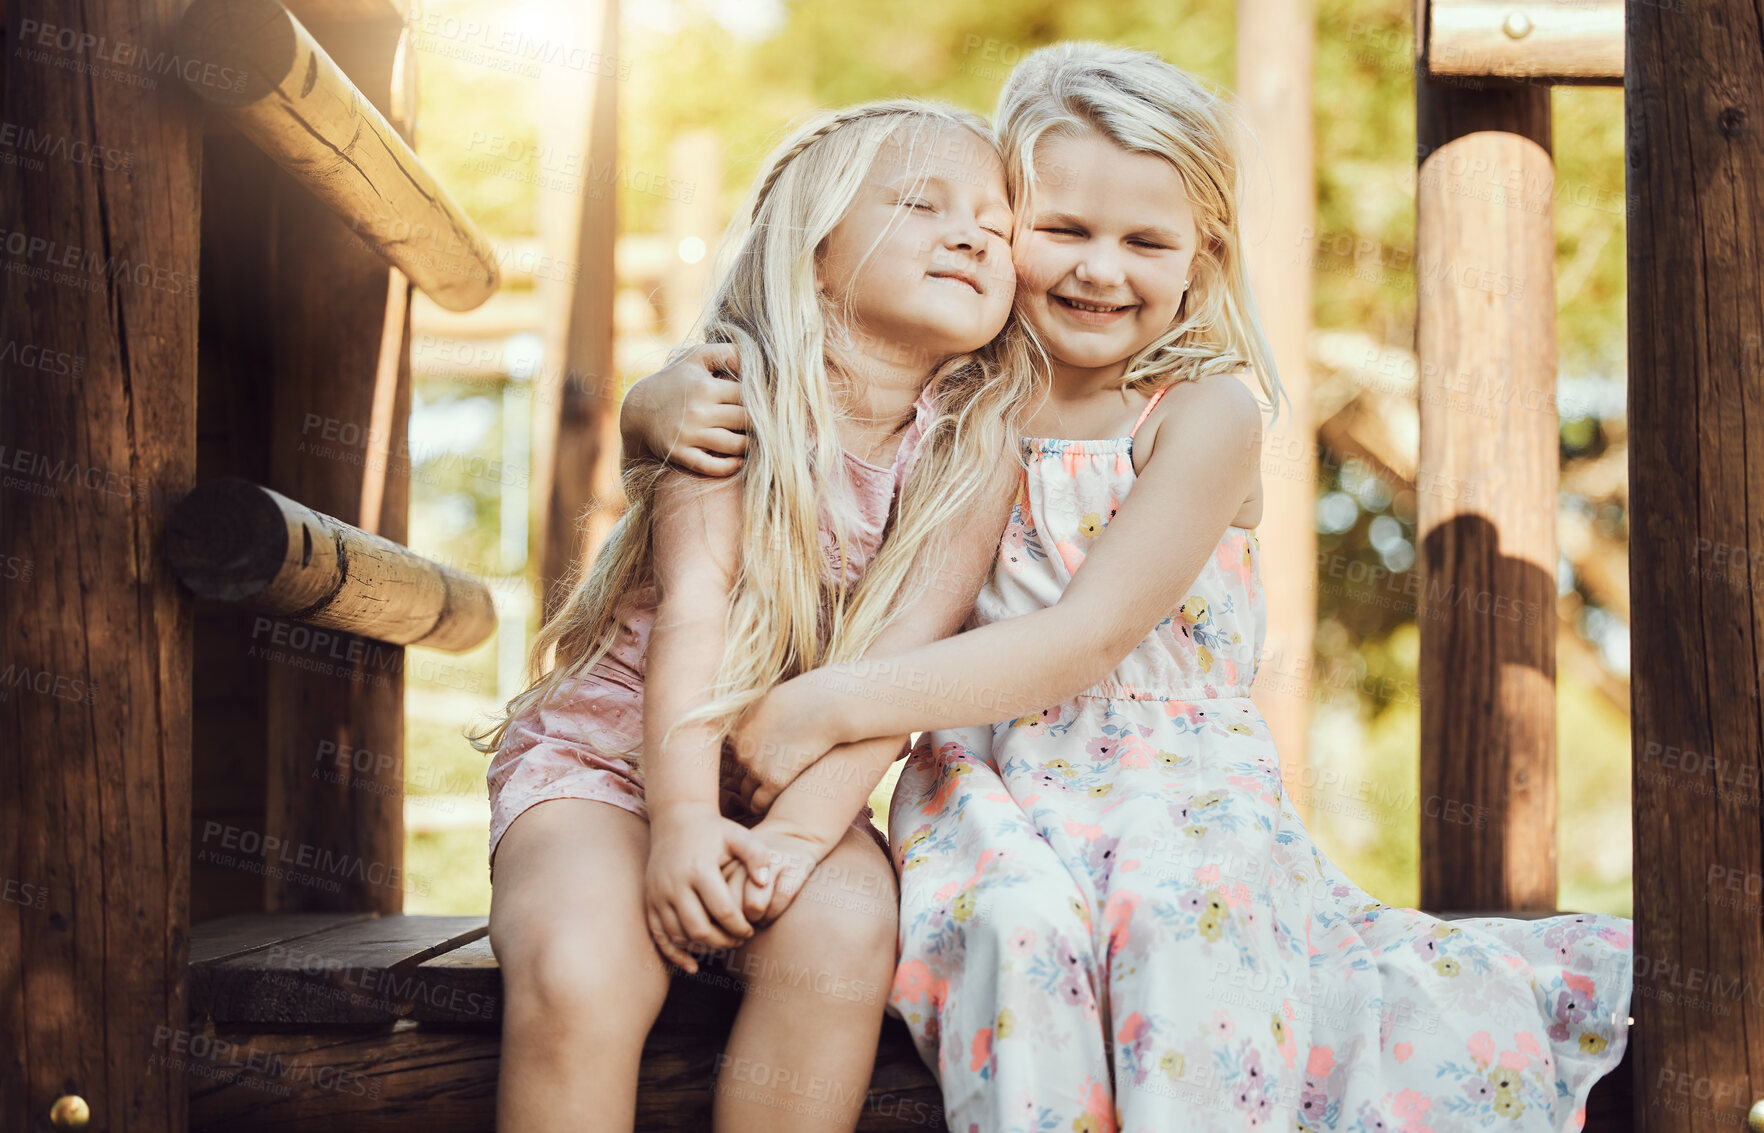 Buy stock photo Happy, hug and girl siblings at playground for bonding, wellness and outdoor summer fun together. Care, freedom and happiness of young kids embracing with cheerful smile at park in Canada.

